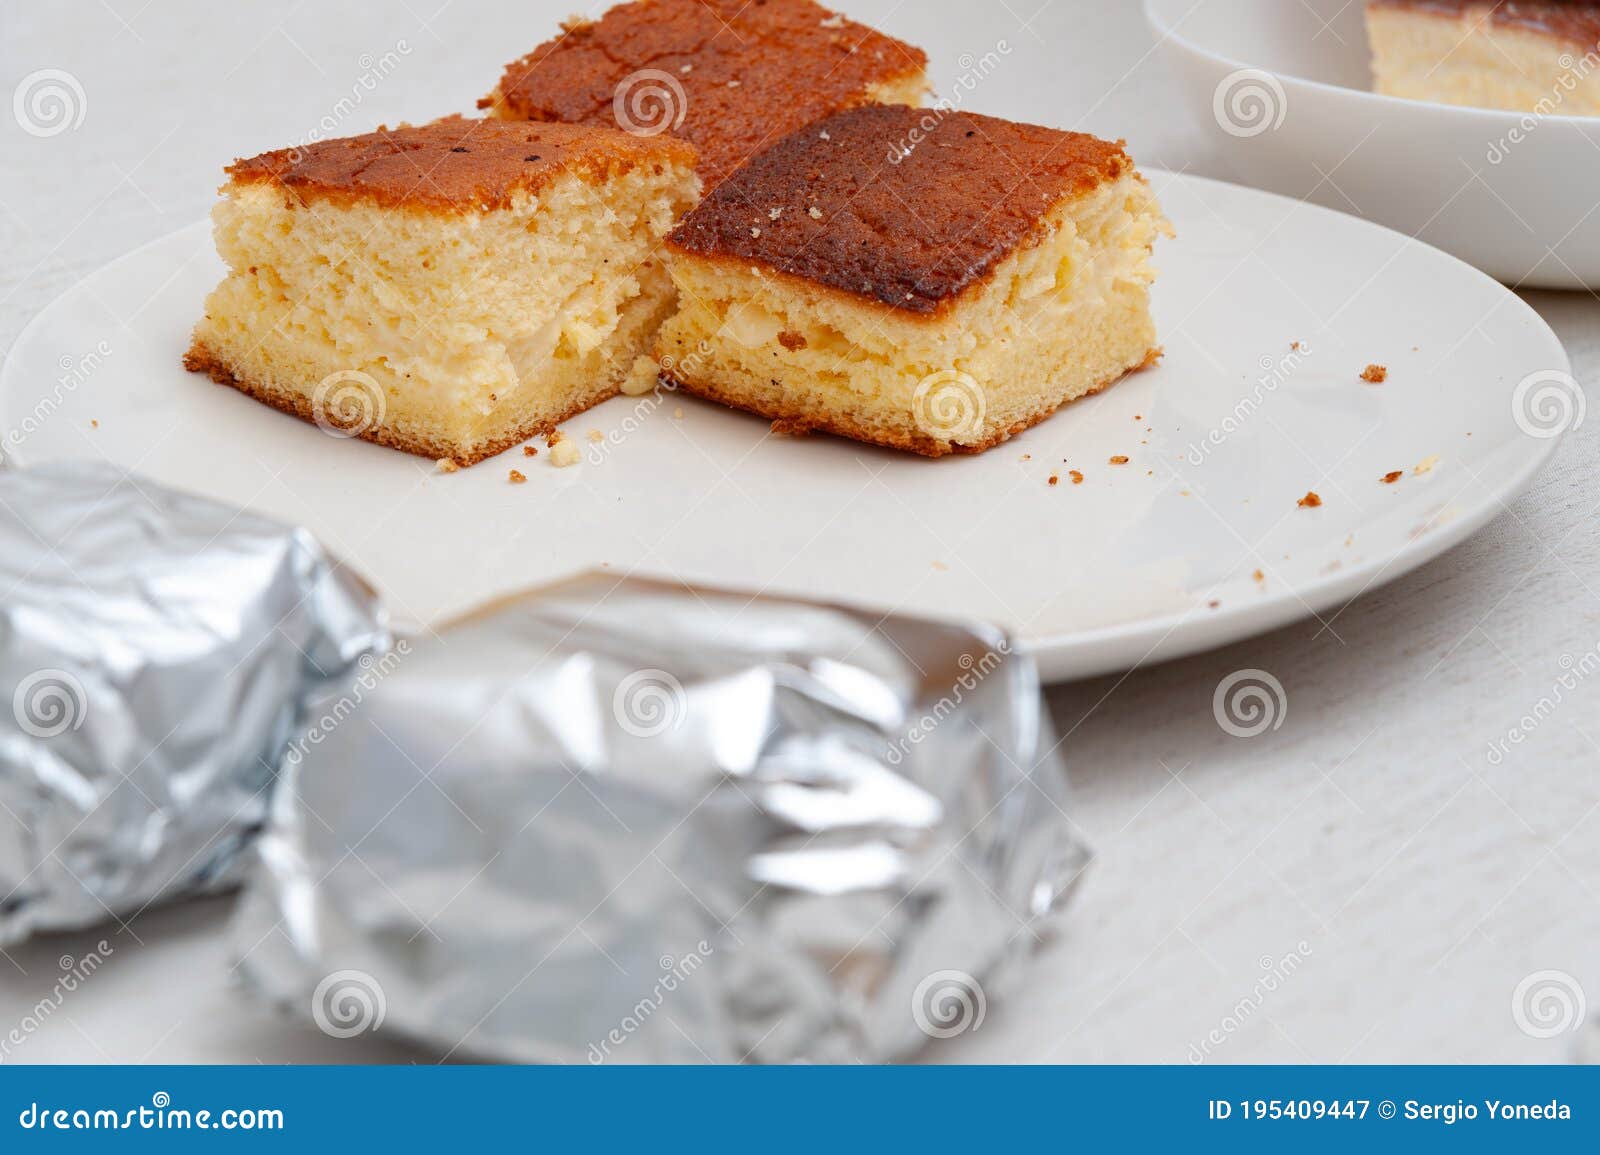 traditional brazilian dessert known as bolo gelado - making step by step: cake pieces wrapped and not wrapped in aluminum foil